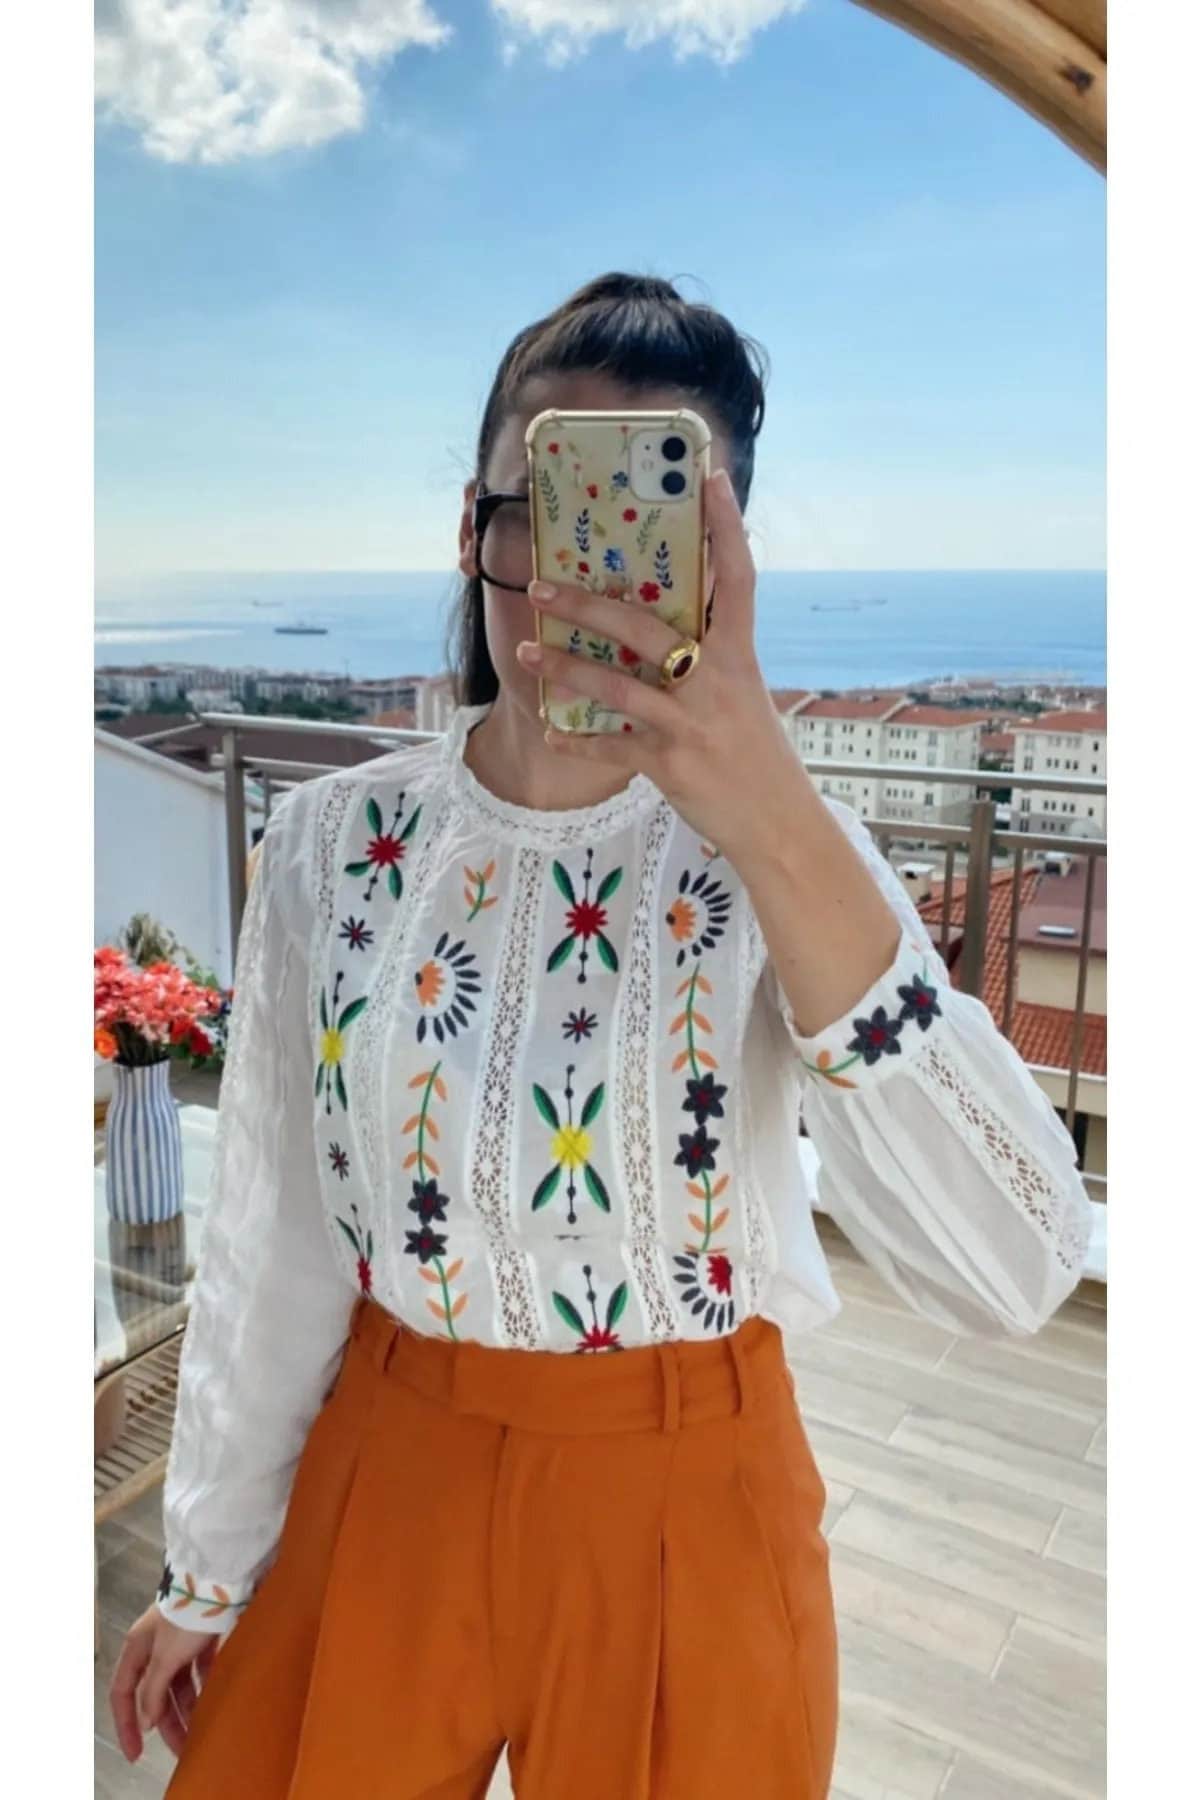 Colorful Flower Embroidered Long Sleeve Ethnic Women's Blouse,Blouse Vintage, Gift For Her,Collar Blouse,Cotton Blouse,Boho Blouse